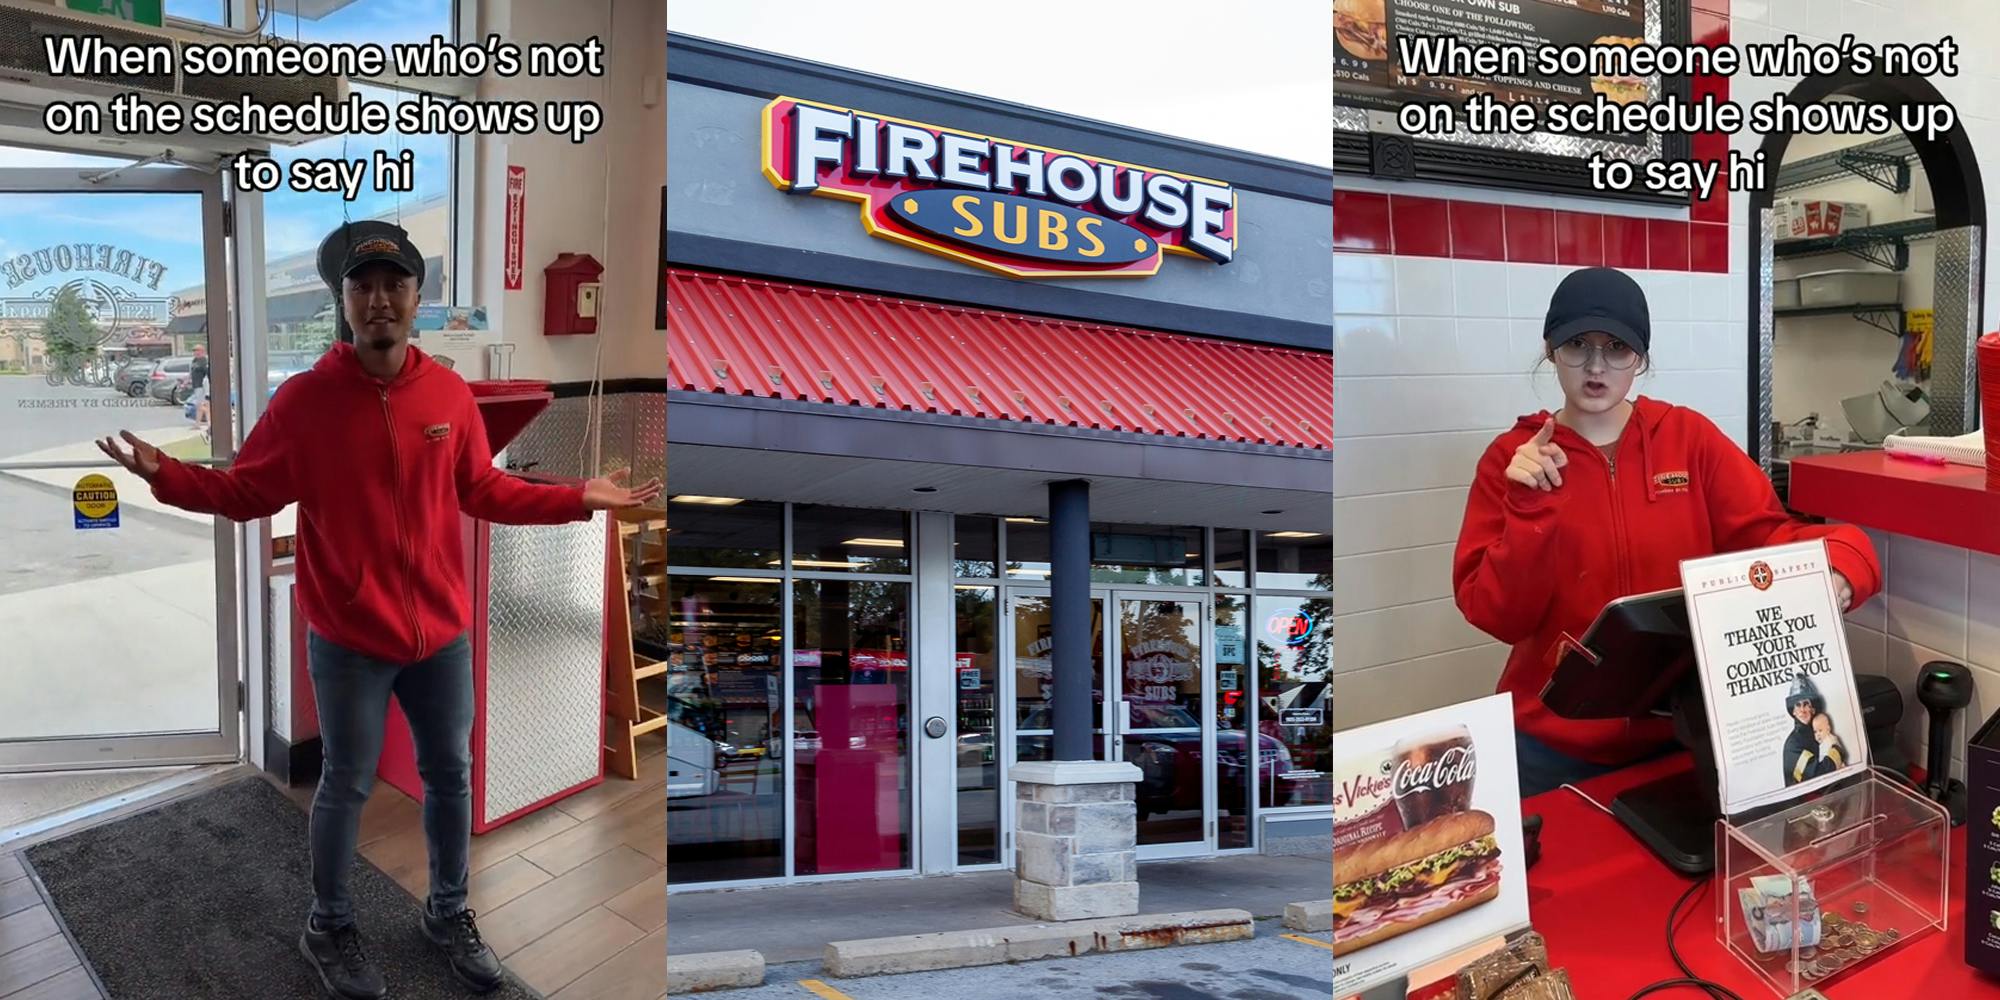 Firehouse Subs employee with caption "When someone who's not on the schedule shows up to say hi" (l) Firehouse Subs building with sign (c) Firehouse Subs employee with caption "When someone who's not on the schedule shows up to say hi" (r)